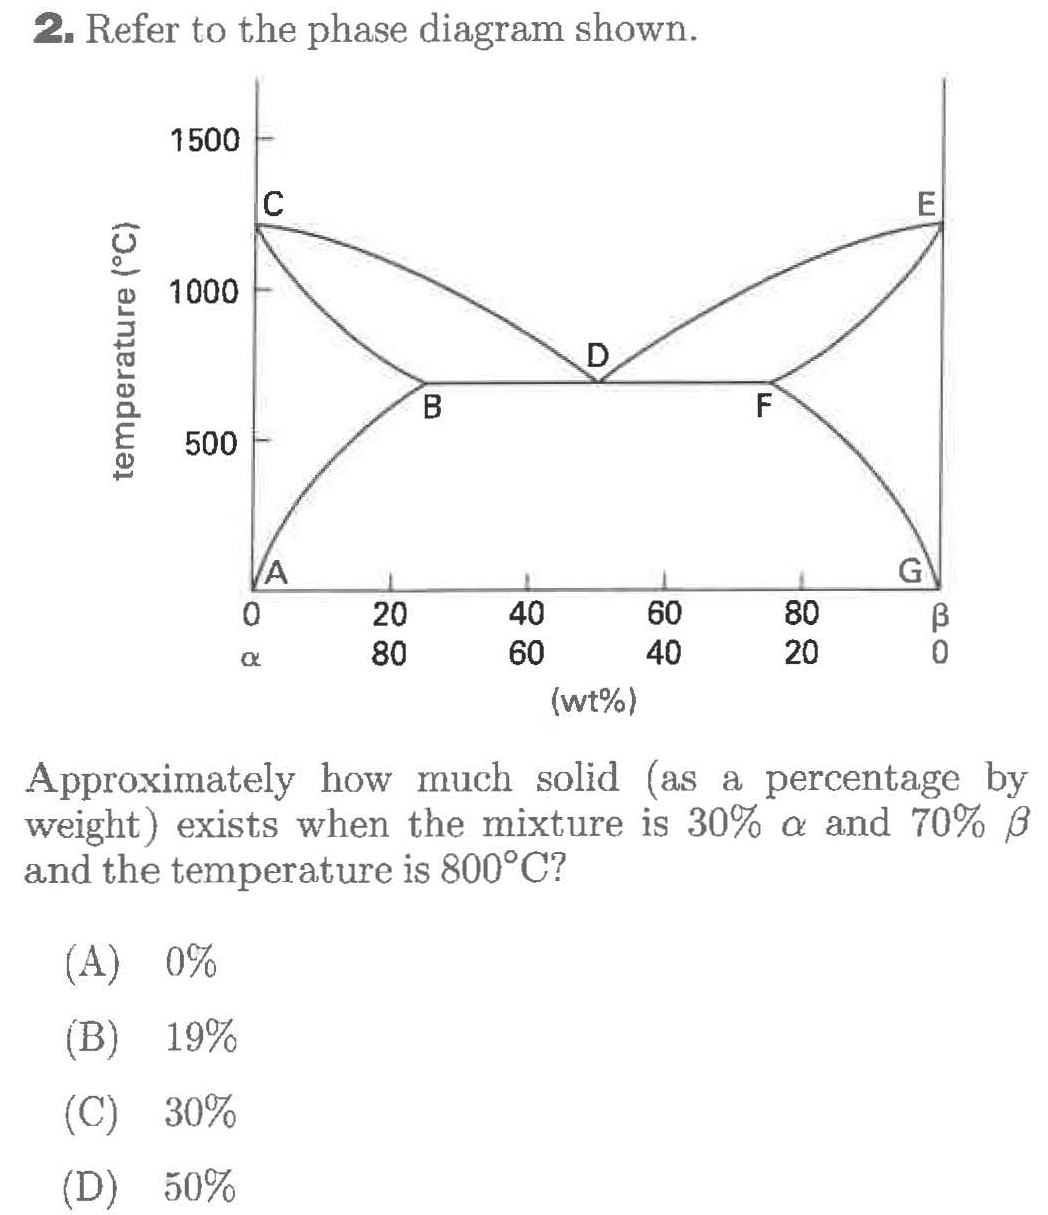 2. Refer to the phase diagram shown
1500
C
E
1000
D.
F
B
500
G
A
60
40
80
20
40
0
20
80
60
0
(wt%)
Approximately how much solid (as a percentage by
weight) exists when the mixture is 30% a and 70% B
and the temperature is 800°C?
0%
(A)
19%
(B)
(C) 30%
(D) 50%
temperature (°C)
